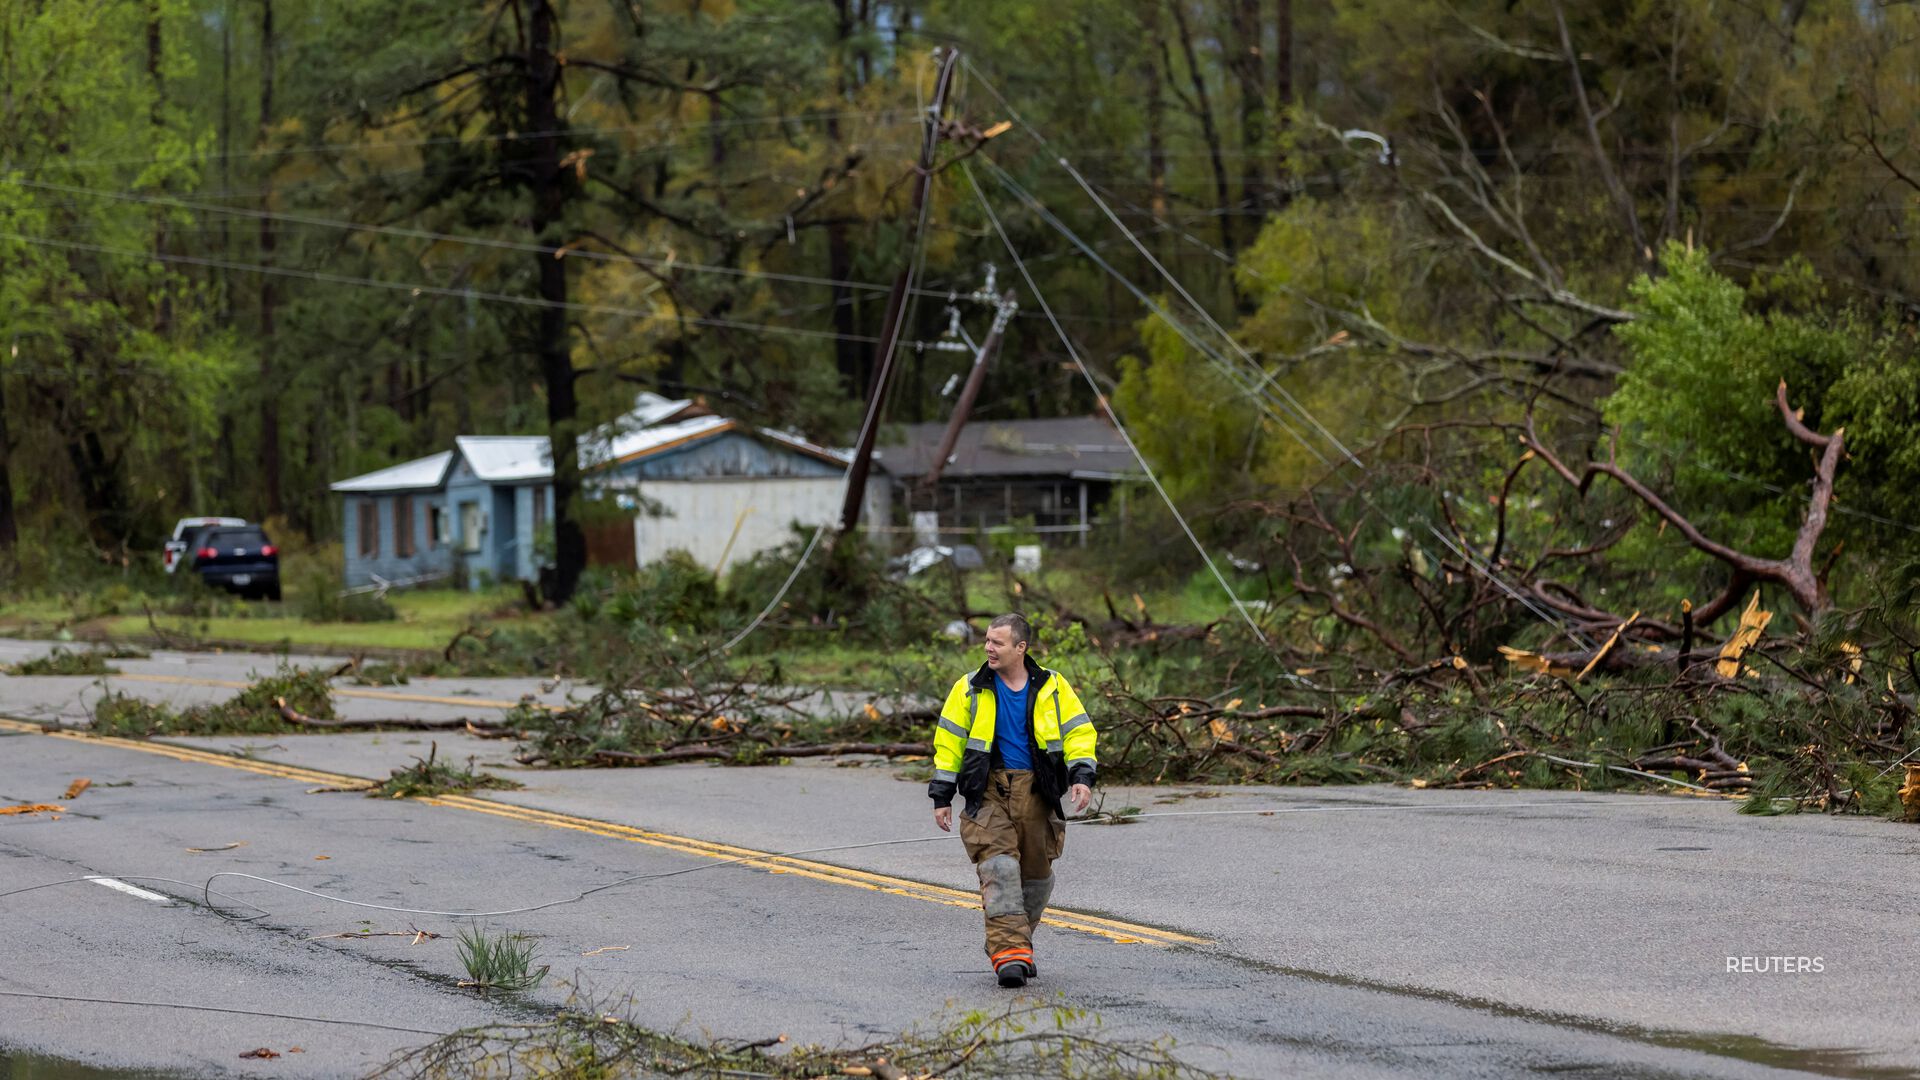 Two people died in storms that hit the Southeast U.S.